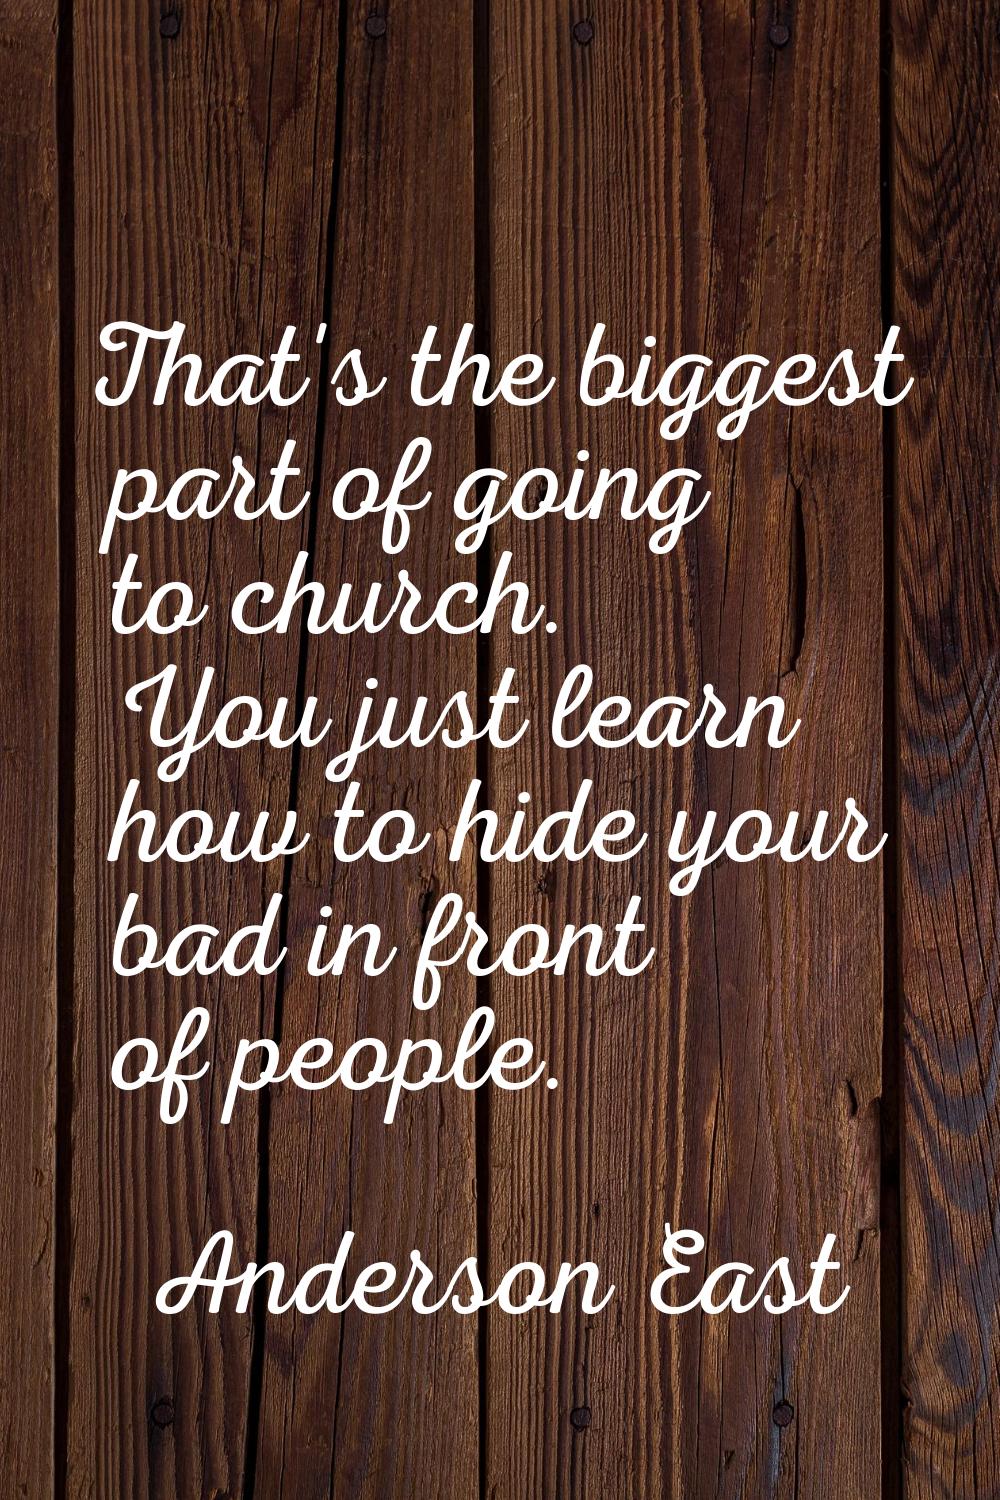 That's the biggest part of going to church. You just learn how to hide your bad in front of people.